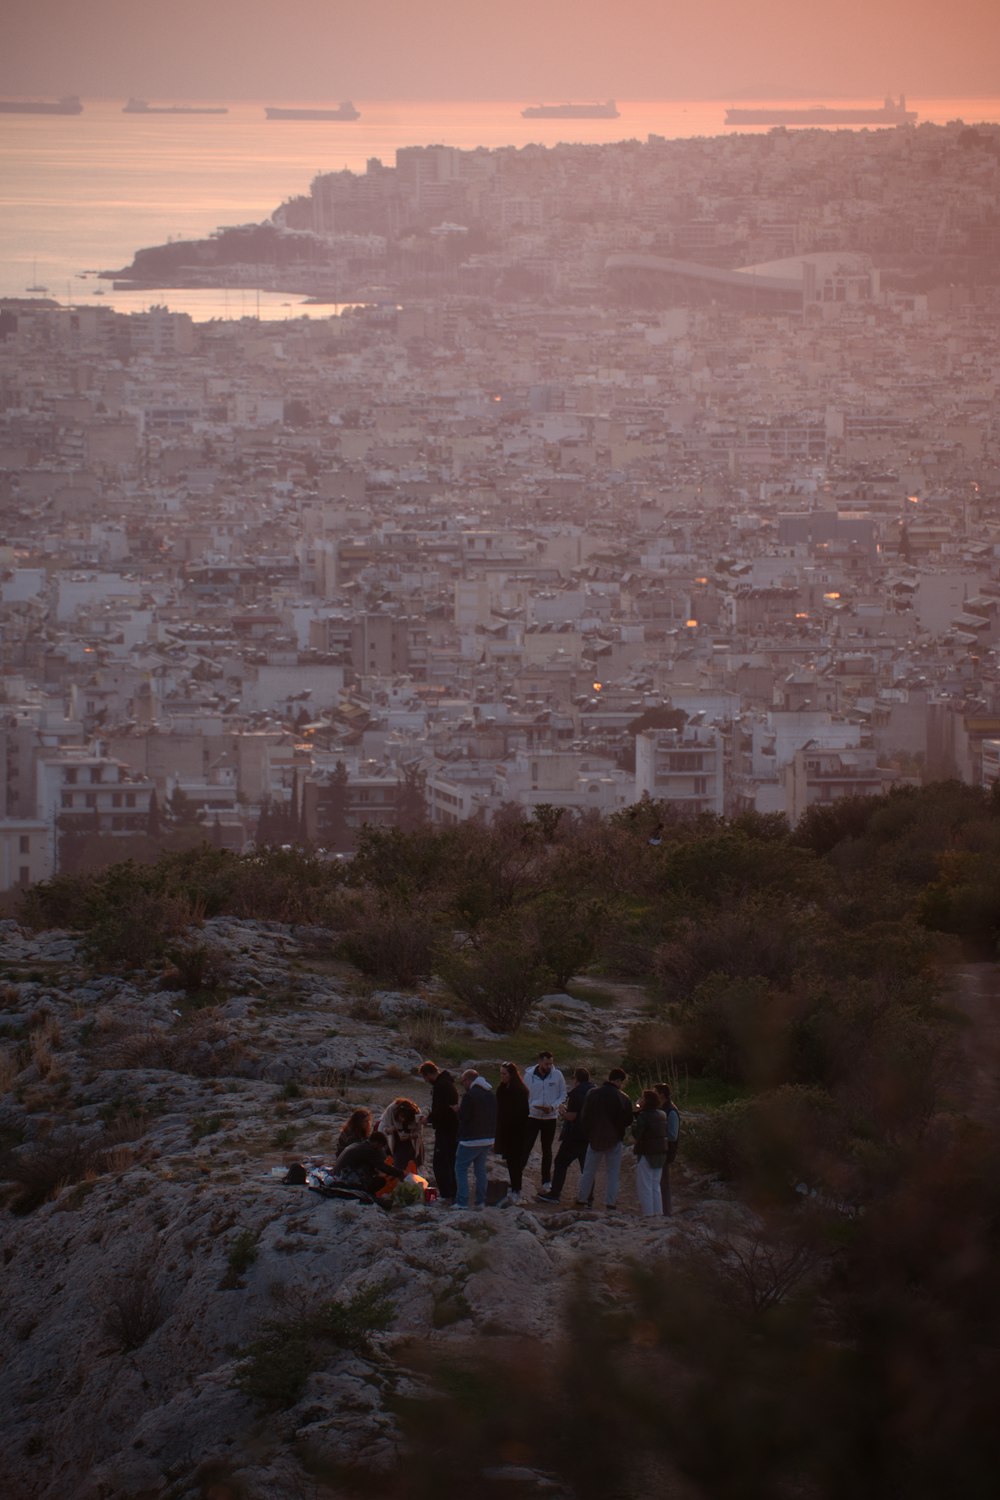 a group of people standing on a hill overlooking a city